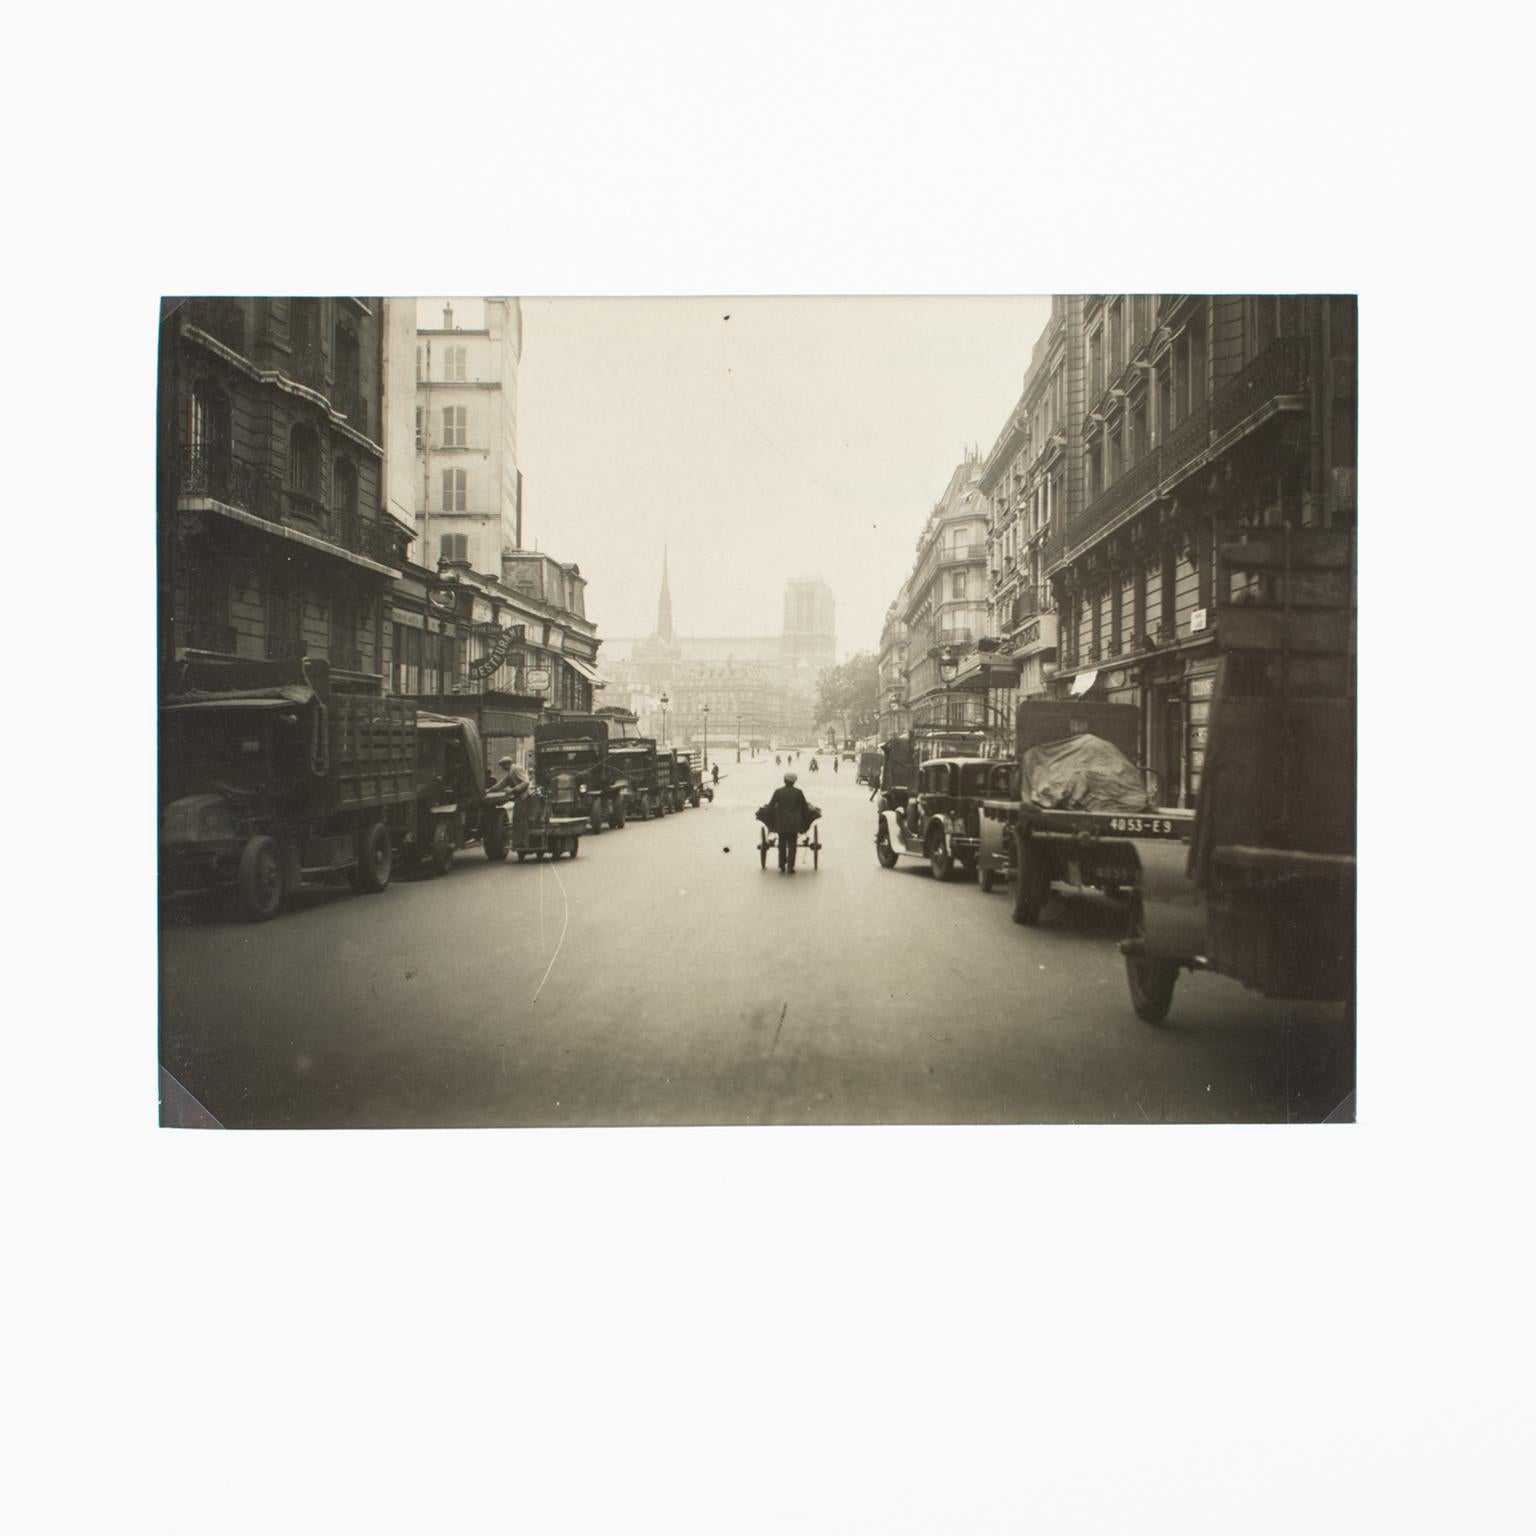 A unique original silver gelatin black and white photograph by Keystone View and Co. 
View of The Halles Market in Paris, circa 1940.
Features:
Original silver gelatin print photography unframed.
Press photography.
Press agency: KEYSTONE VIEW CO,